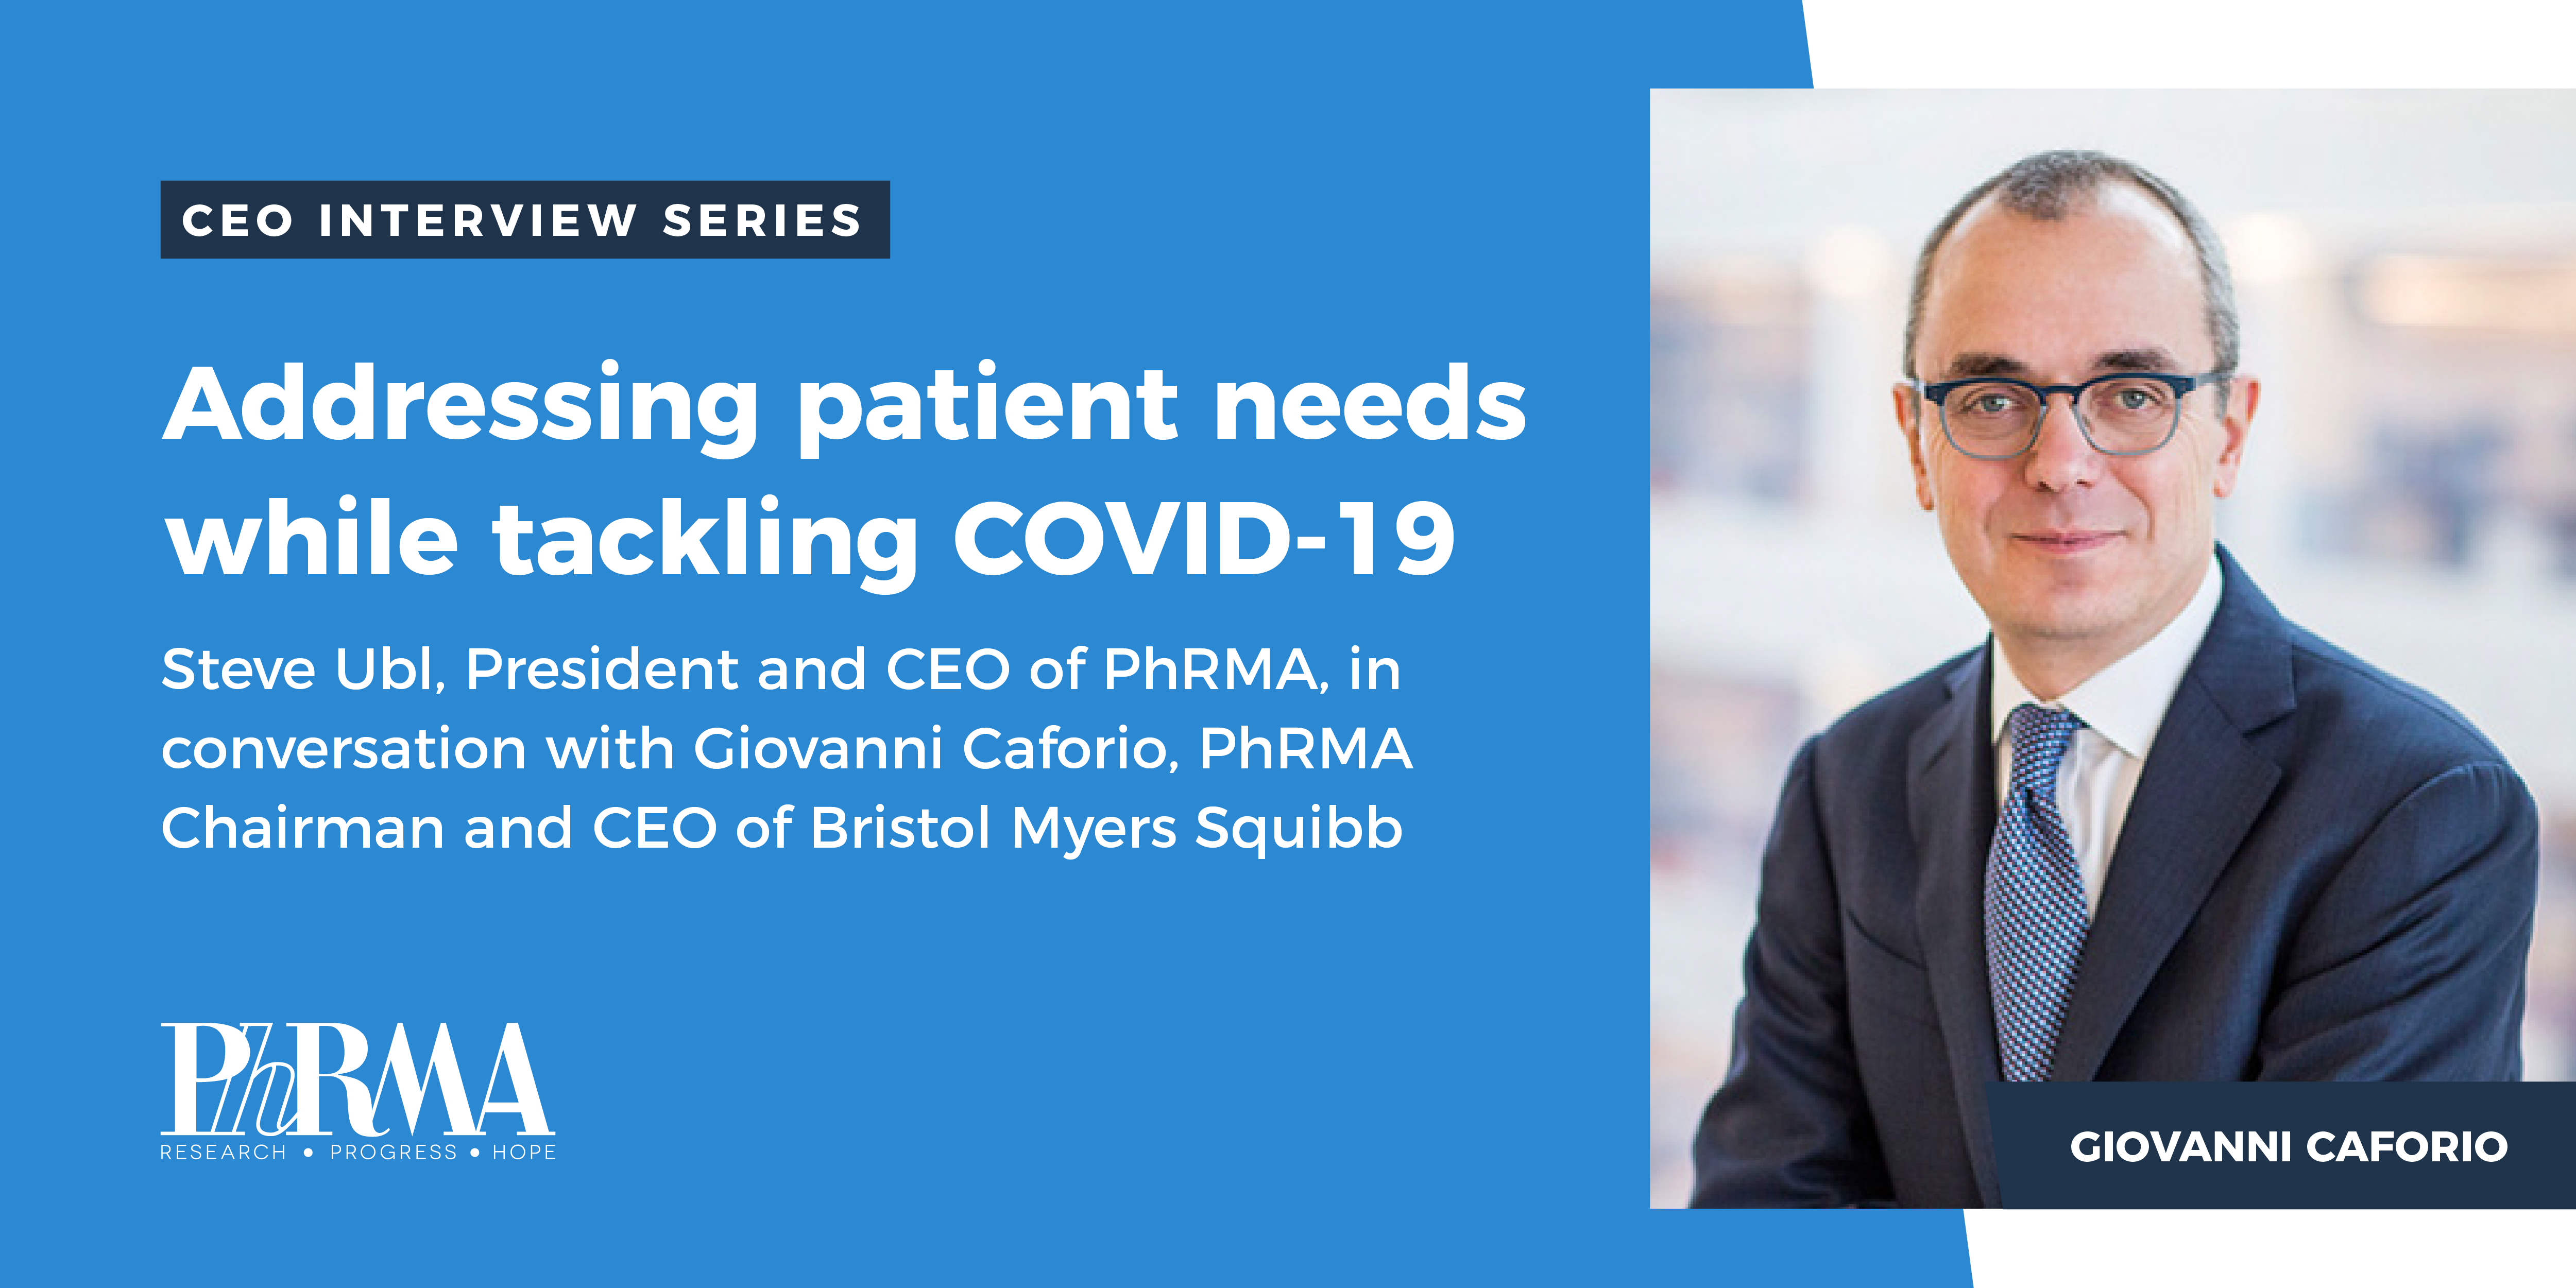 An unprecedented year and the road ahead: A conversation with Giovanni Caforio, PhRMA Chairman and CEO of Bristol Myers Squibb